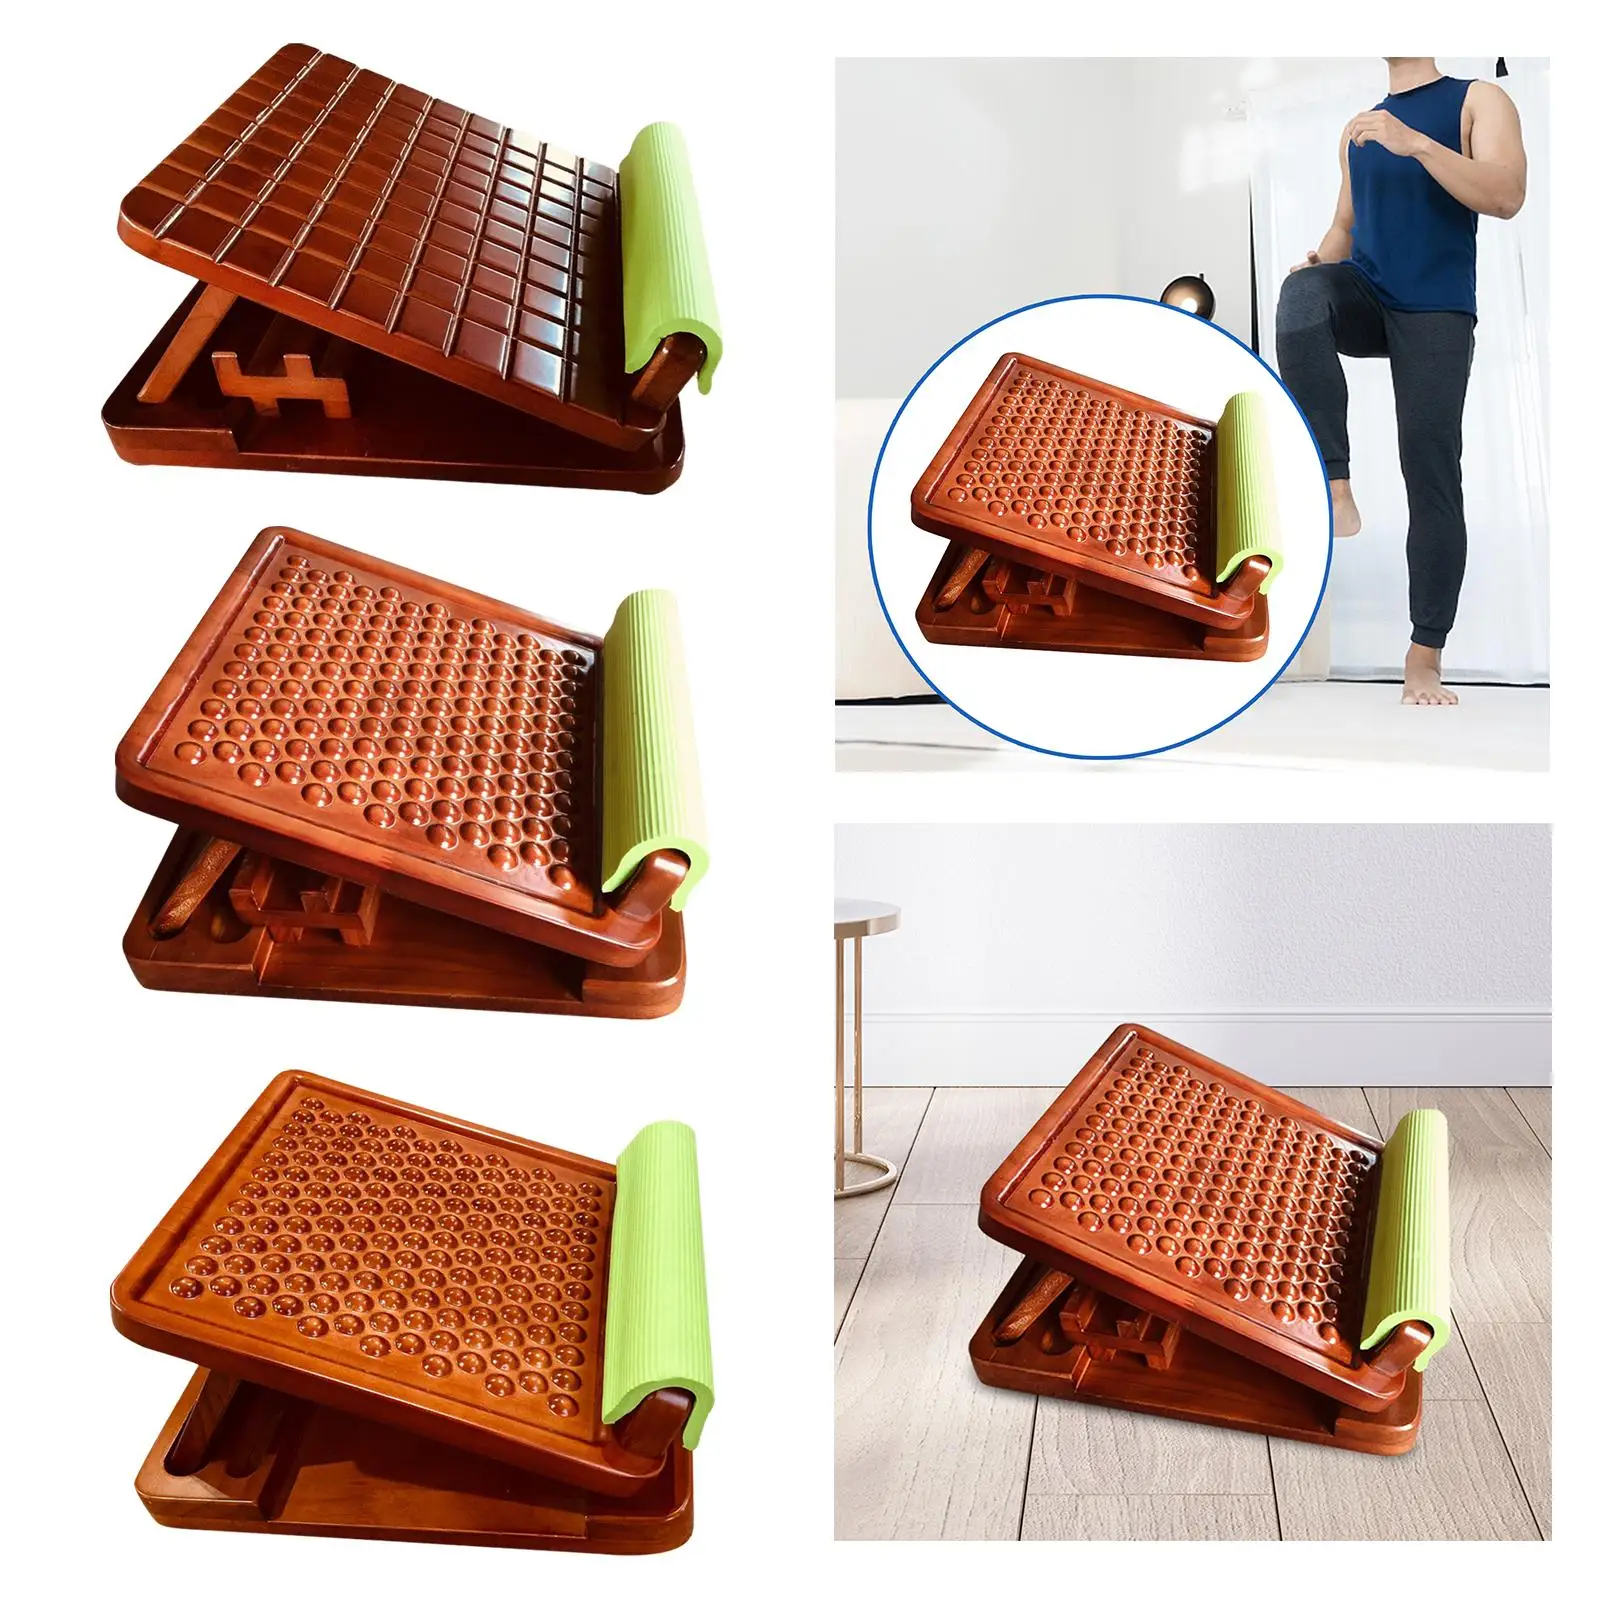 Solid Wood Slant Board for Ankle Exercise Stretching Calves Training Equipment